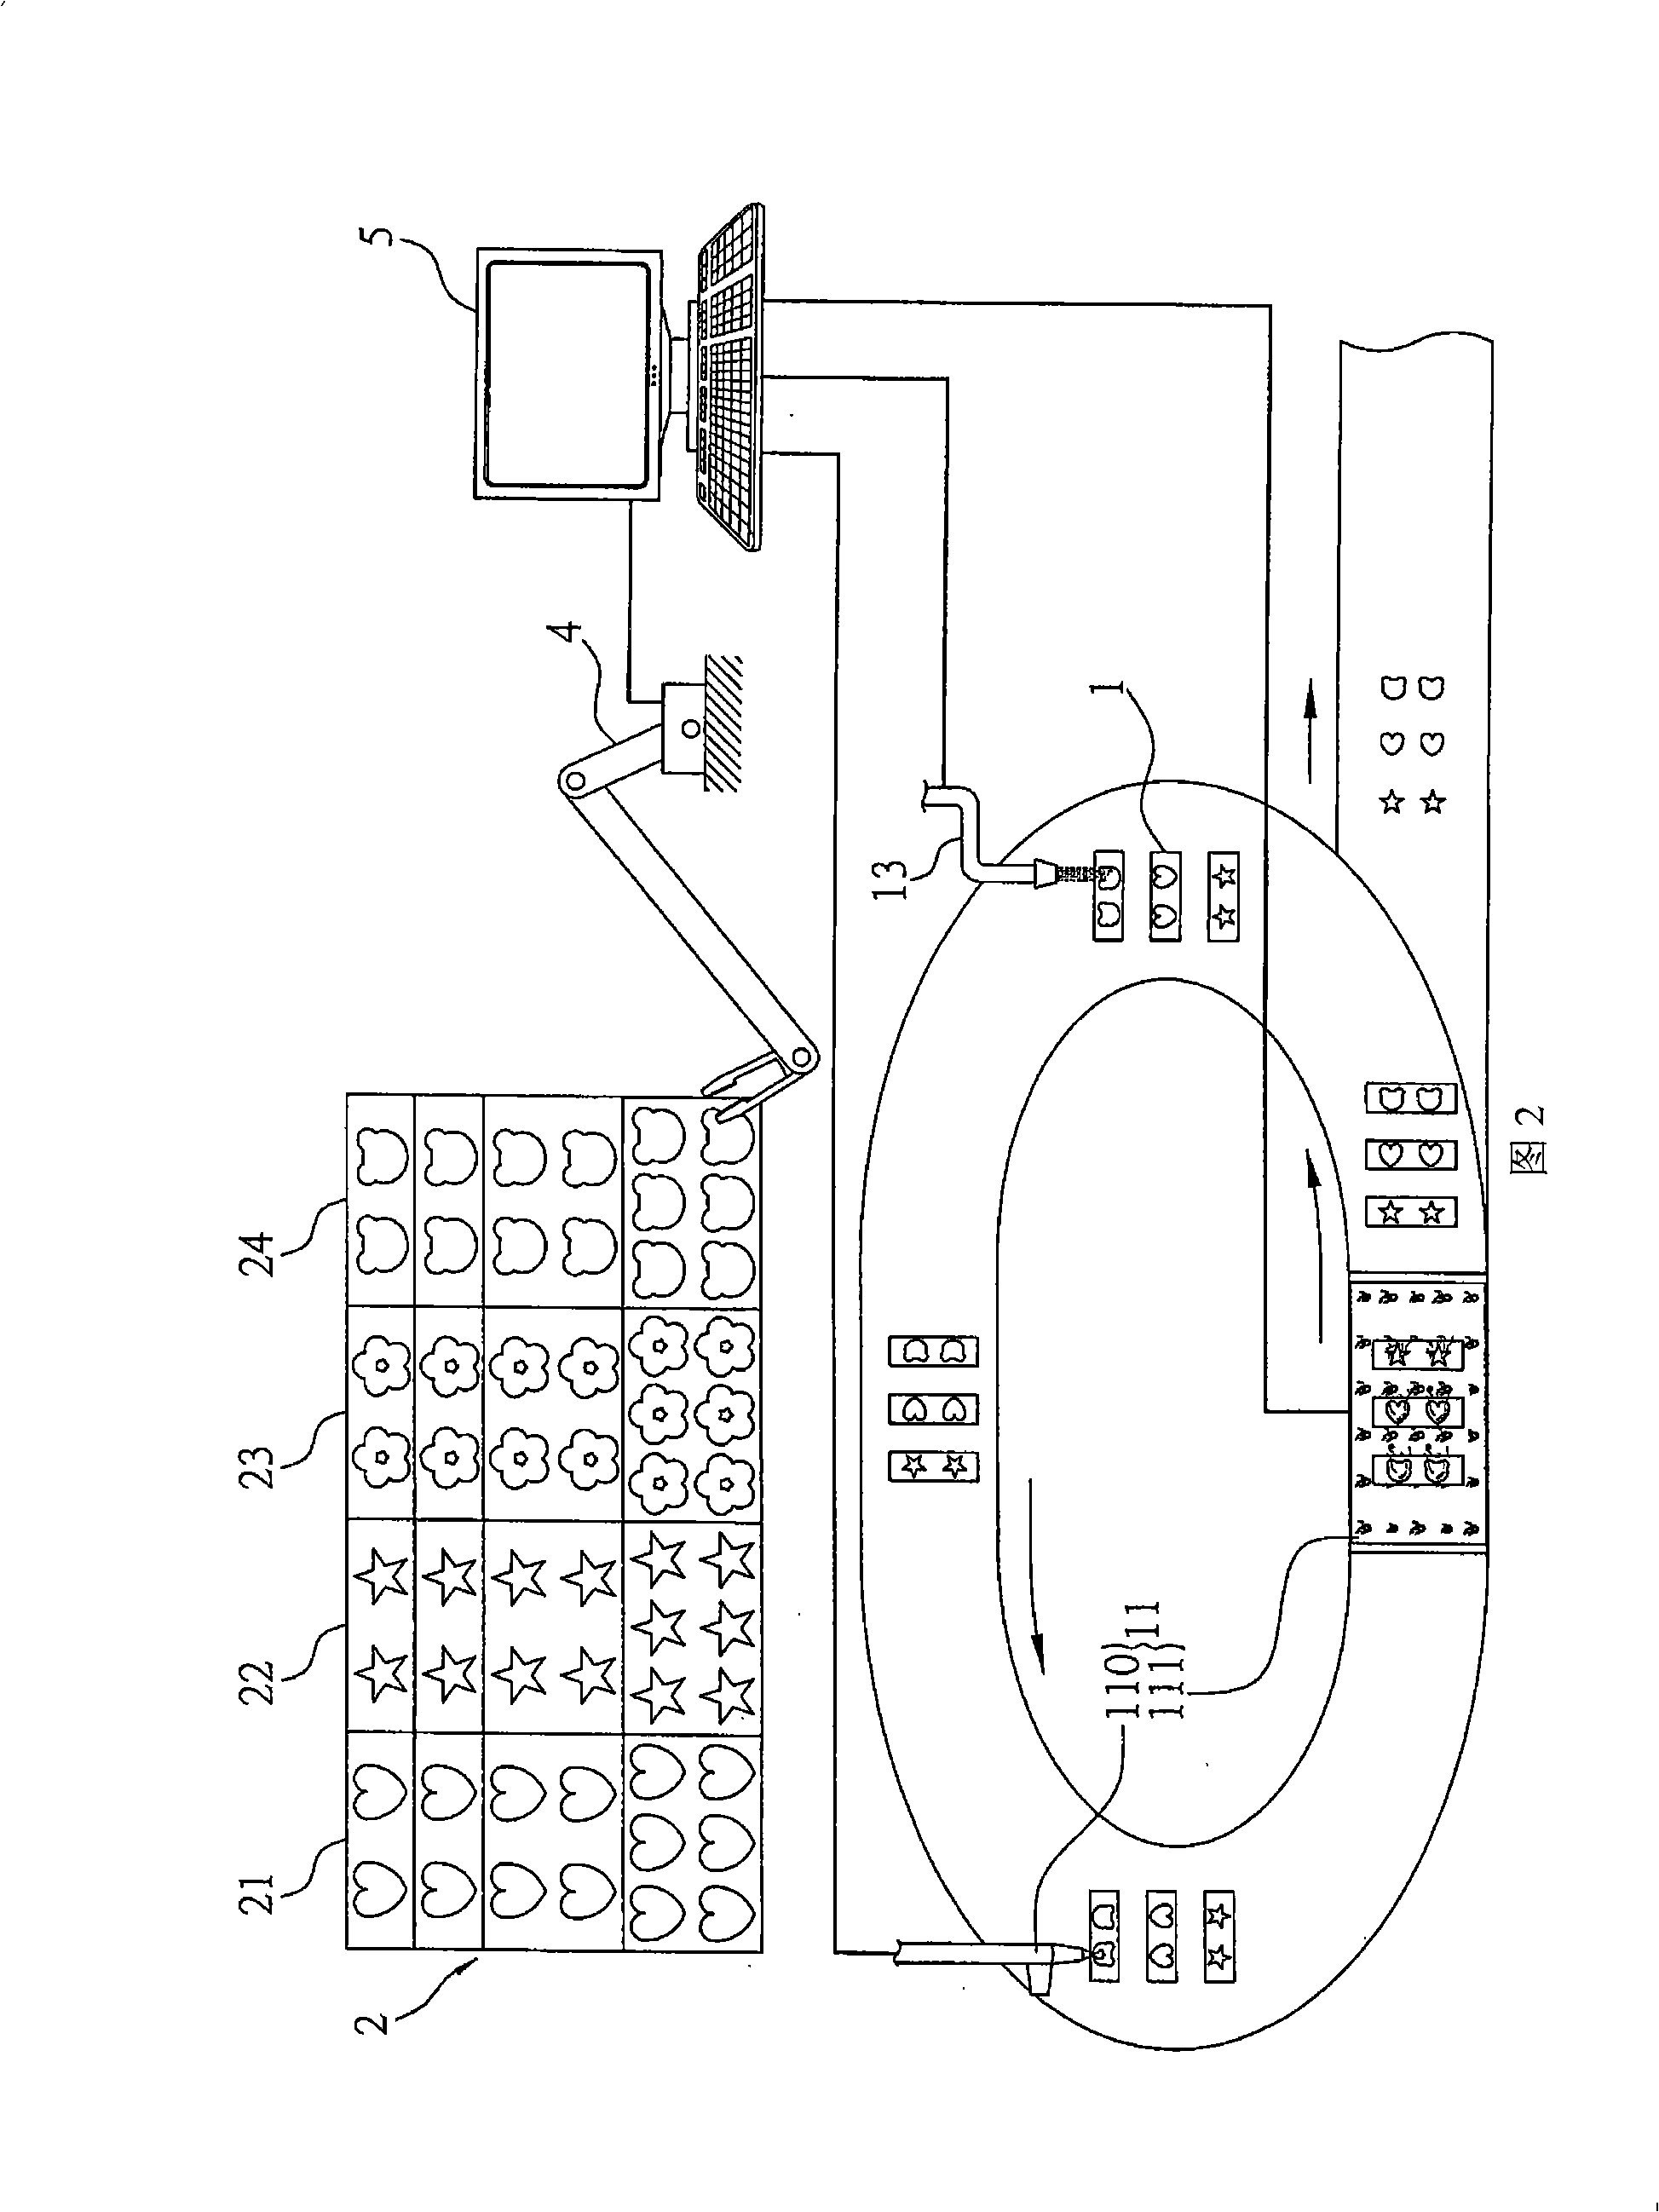 Food forming device and foods producing system having the device